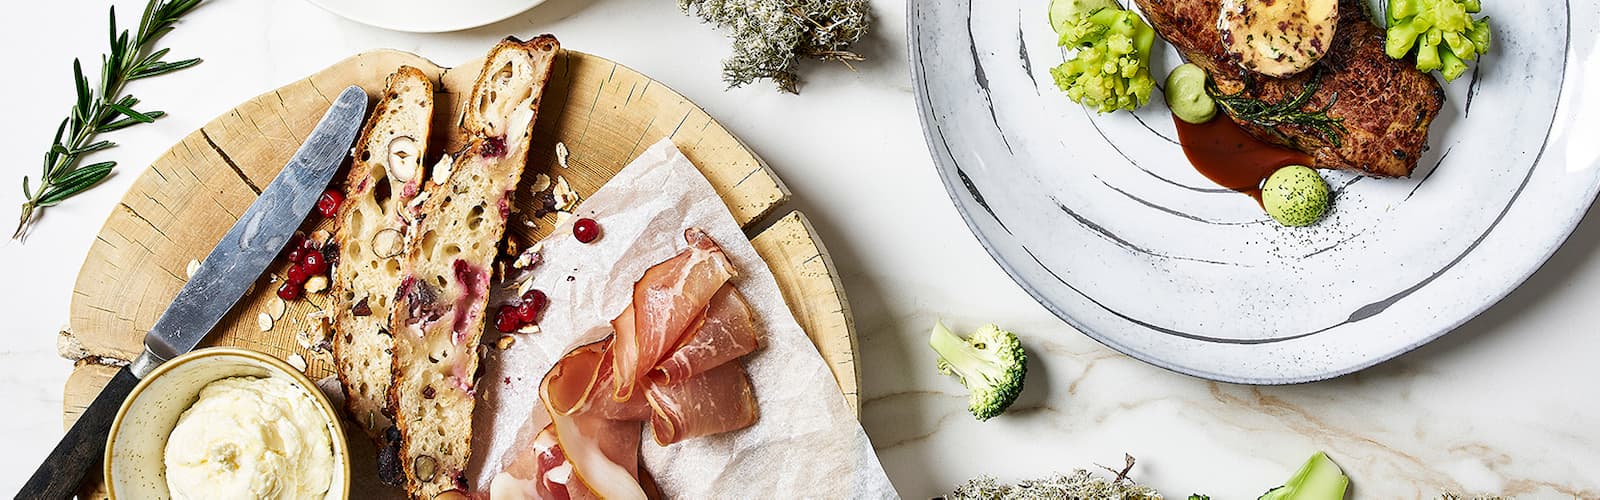 Food moments, charcuterie